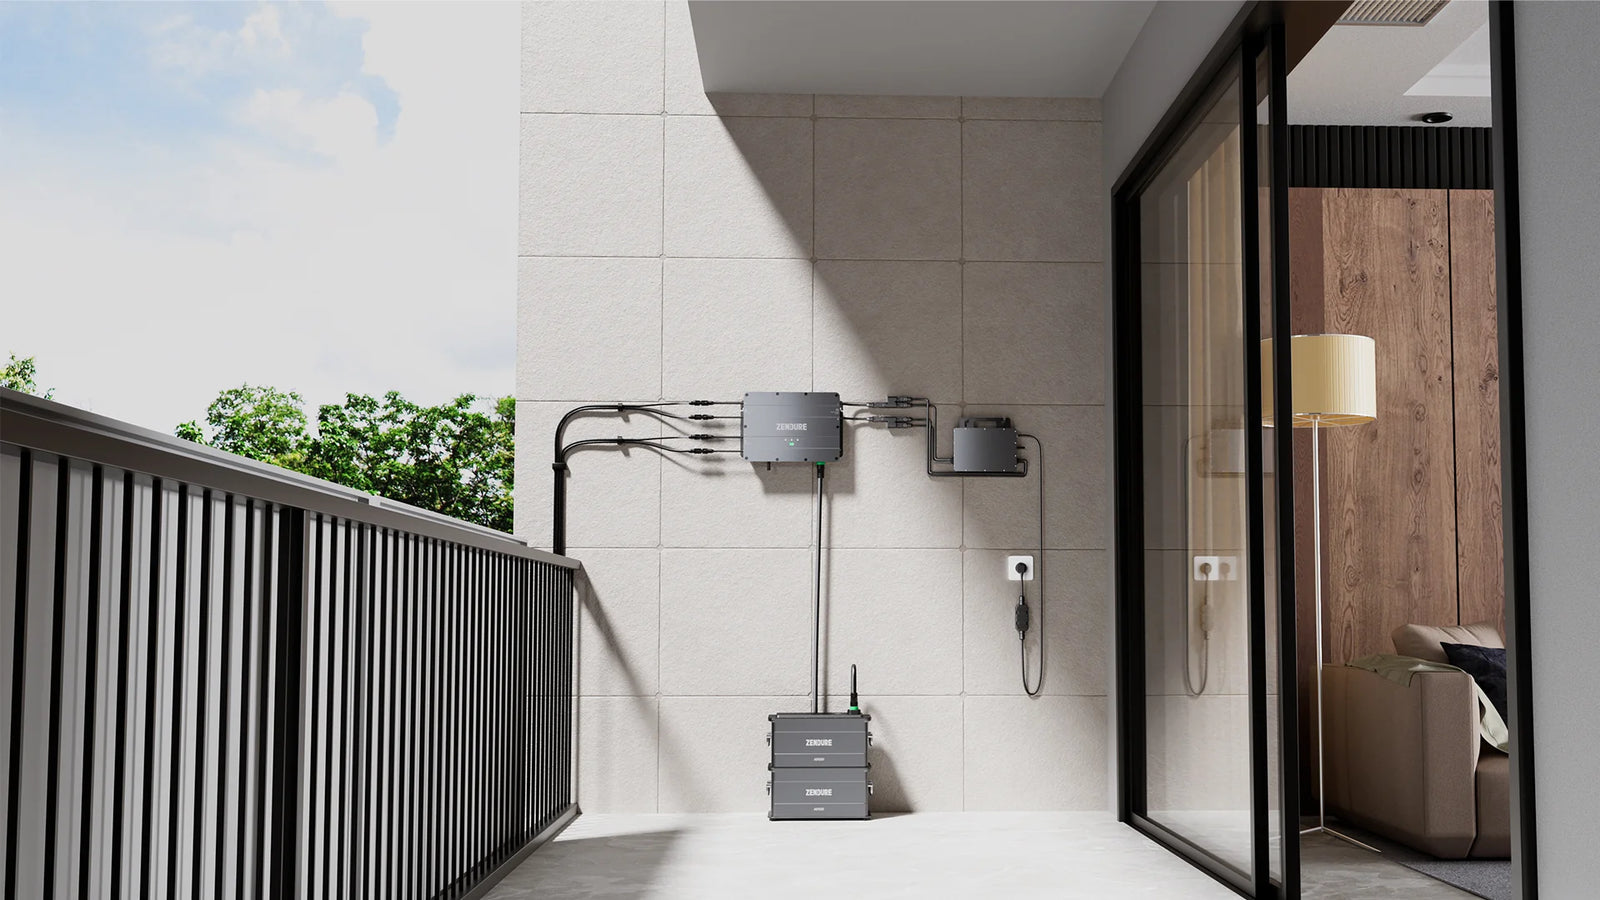 Zendure Launches First Solar Energy Storage System for Balconies